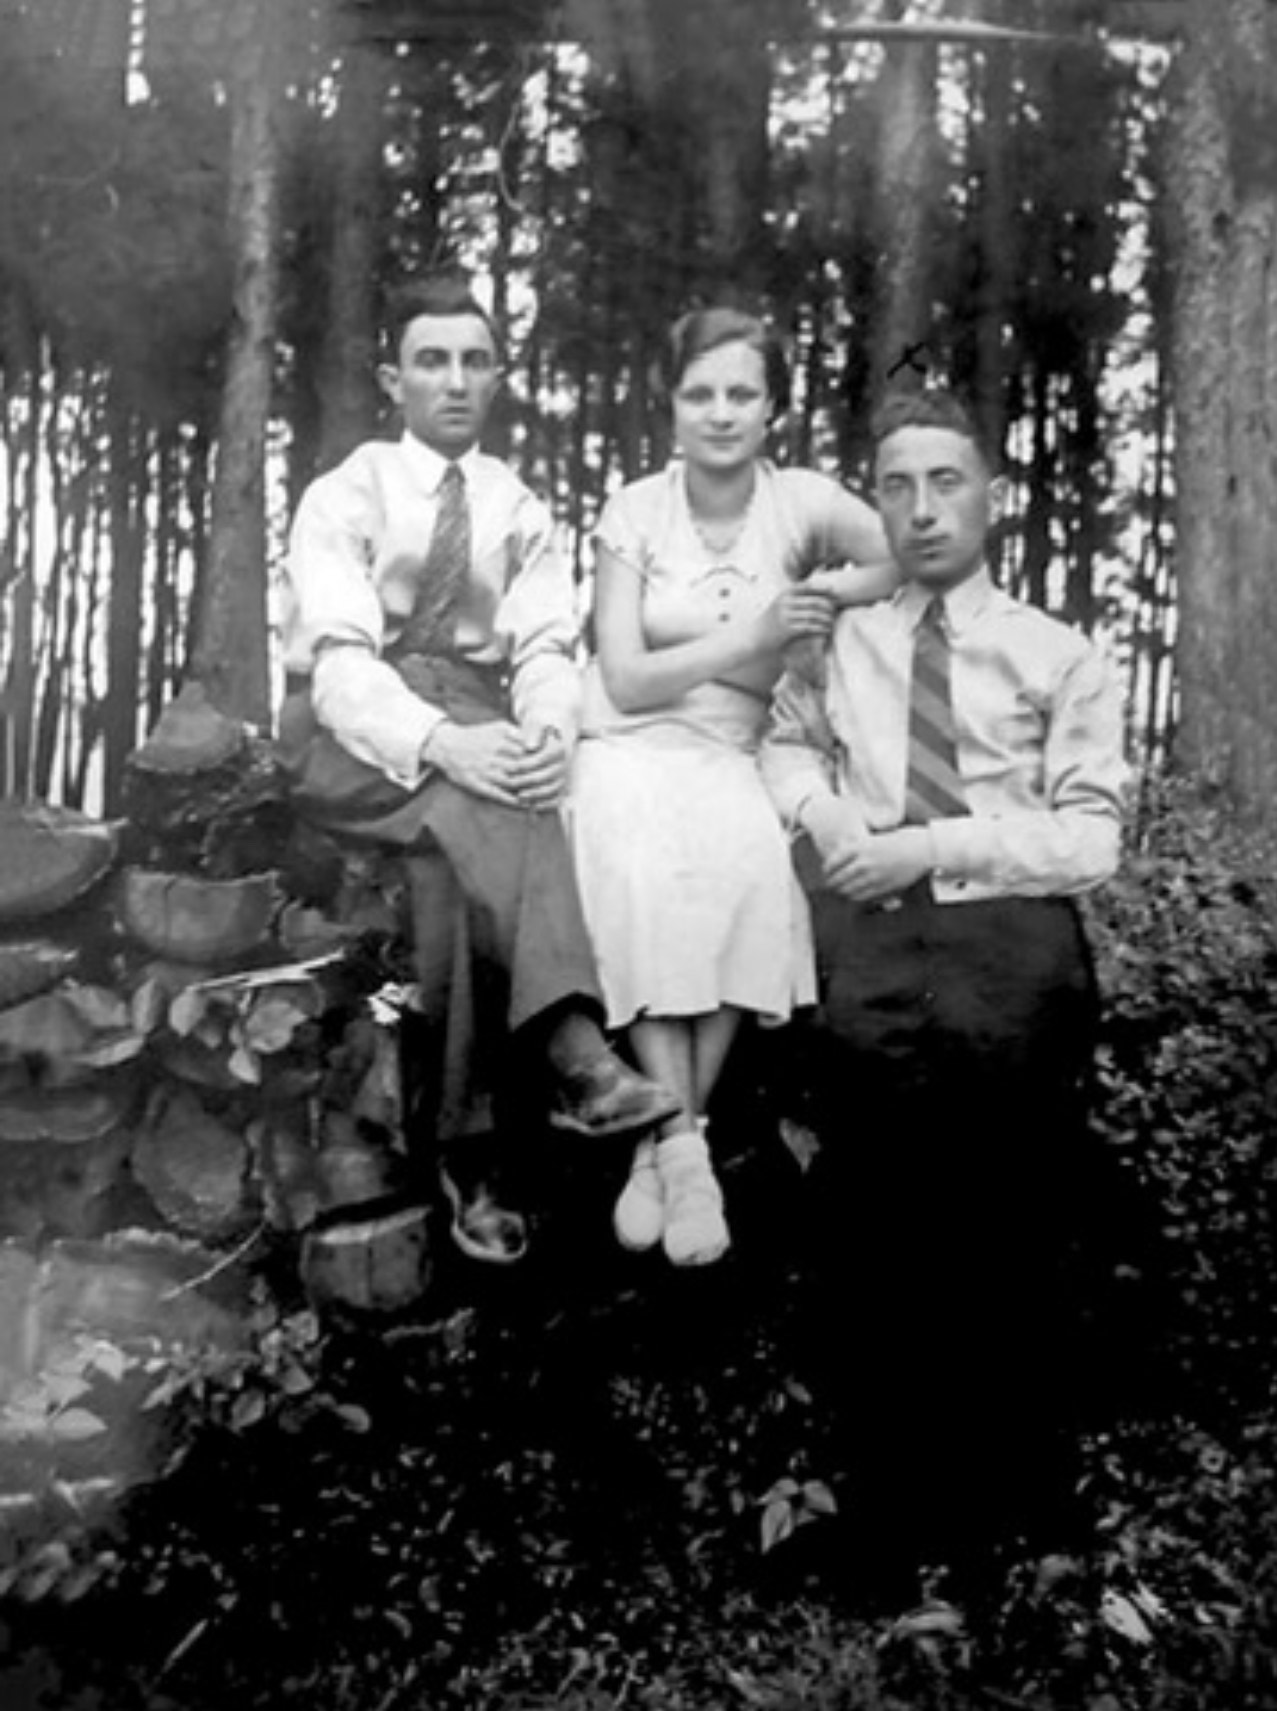 From right to left: Shlomo Lerman,his sister Chaya Rywka , and her husband Josef Grynblum. Background forest in Poland